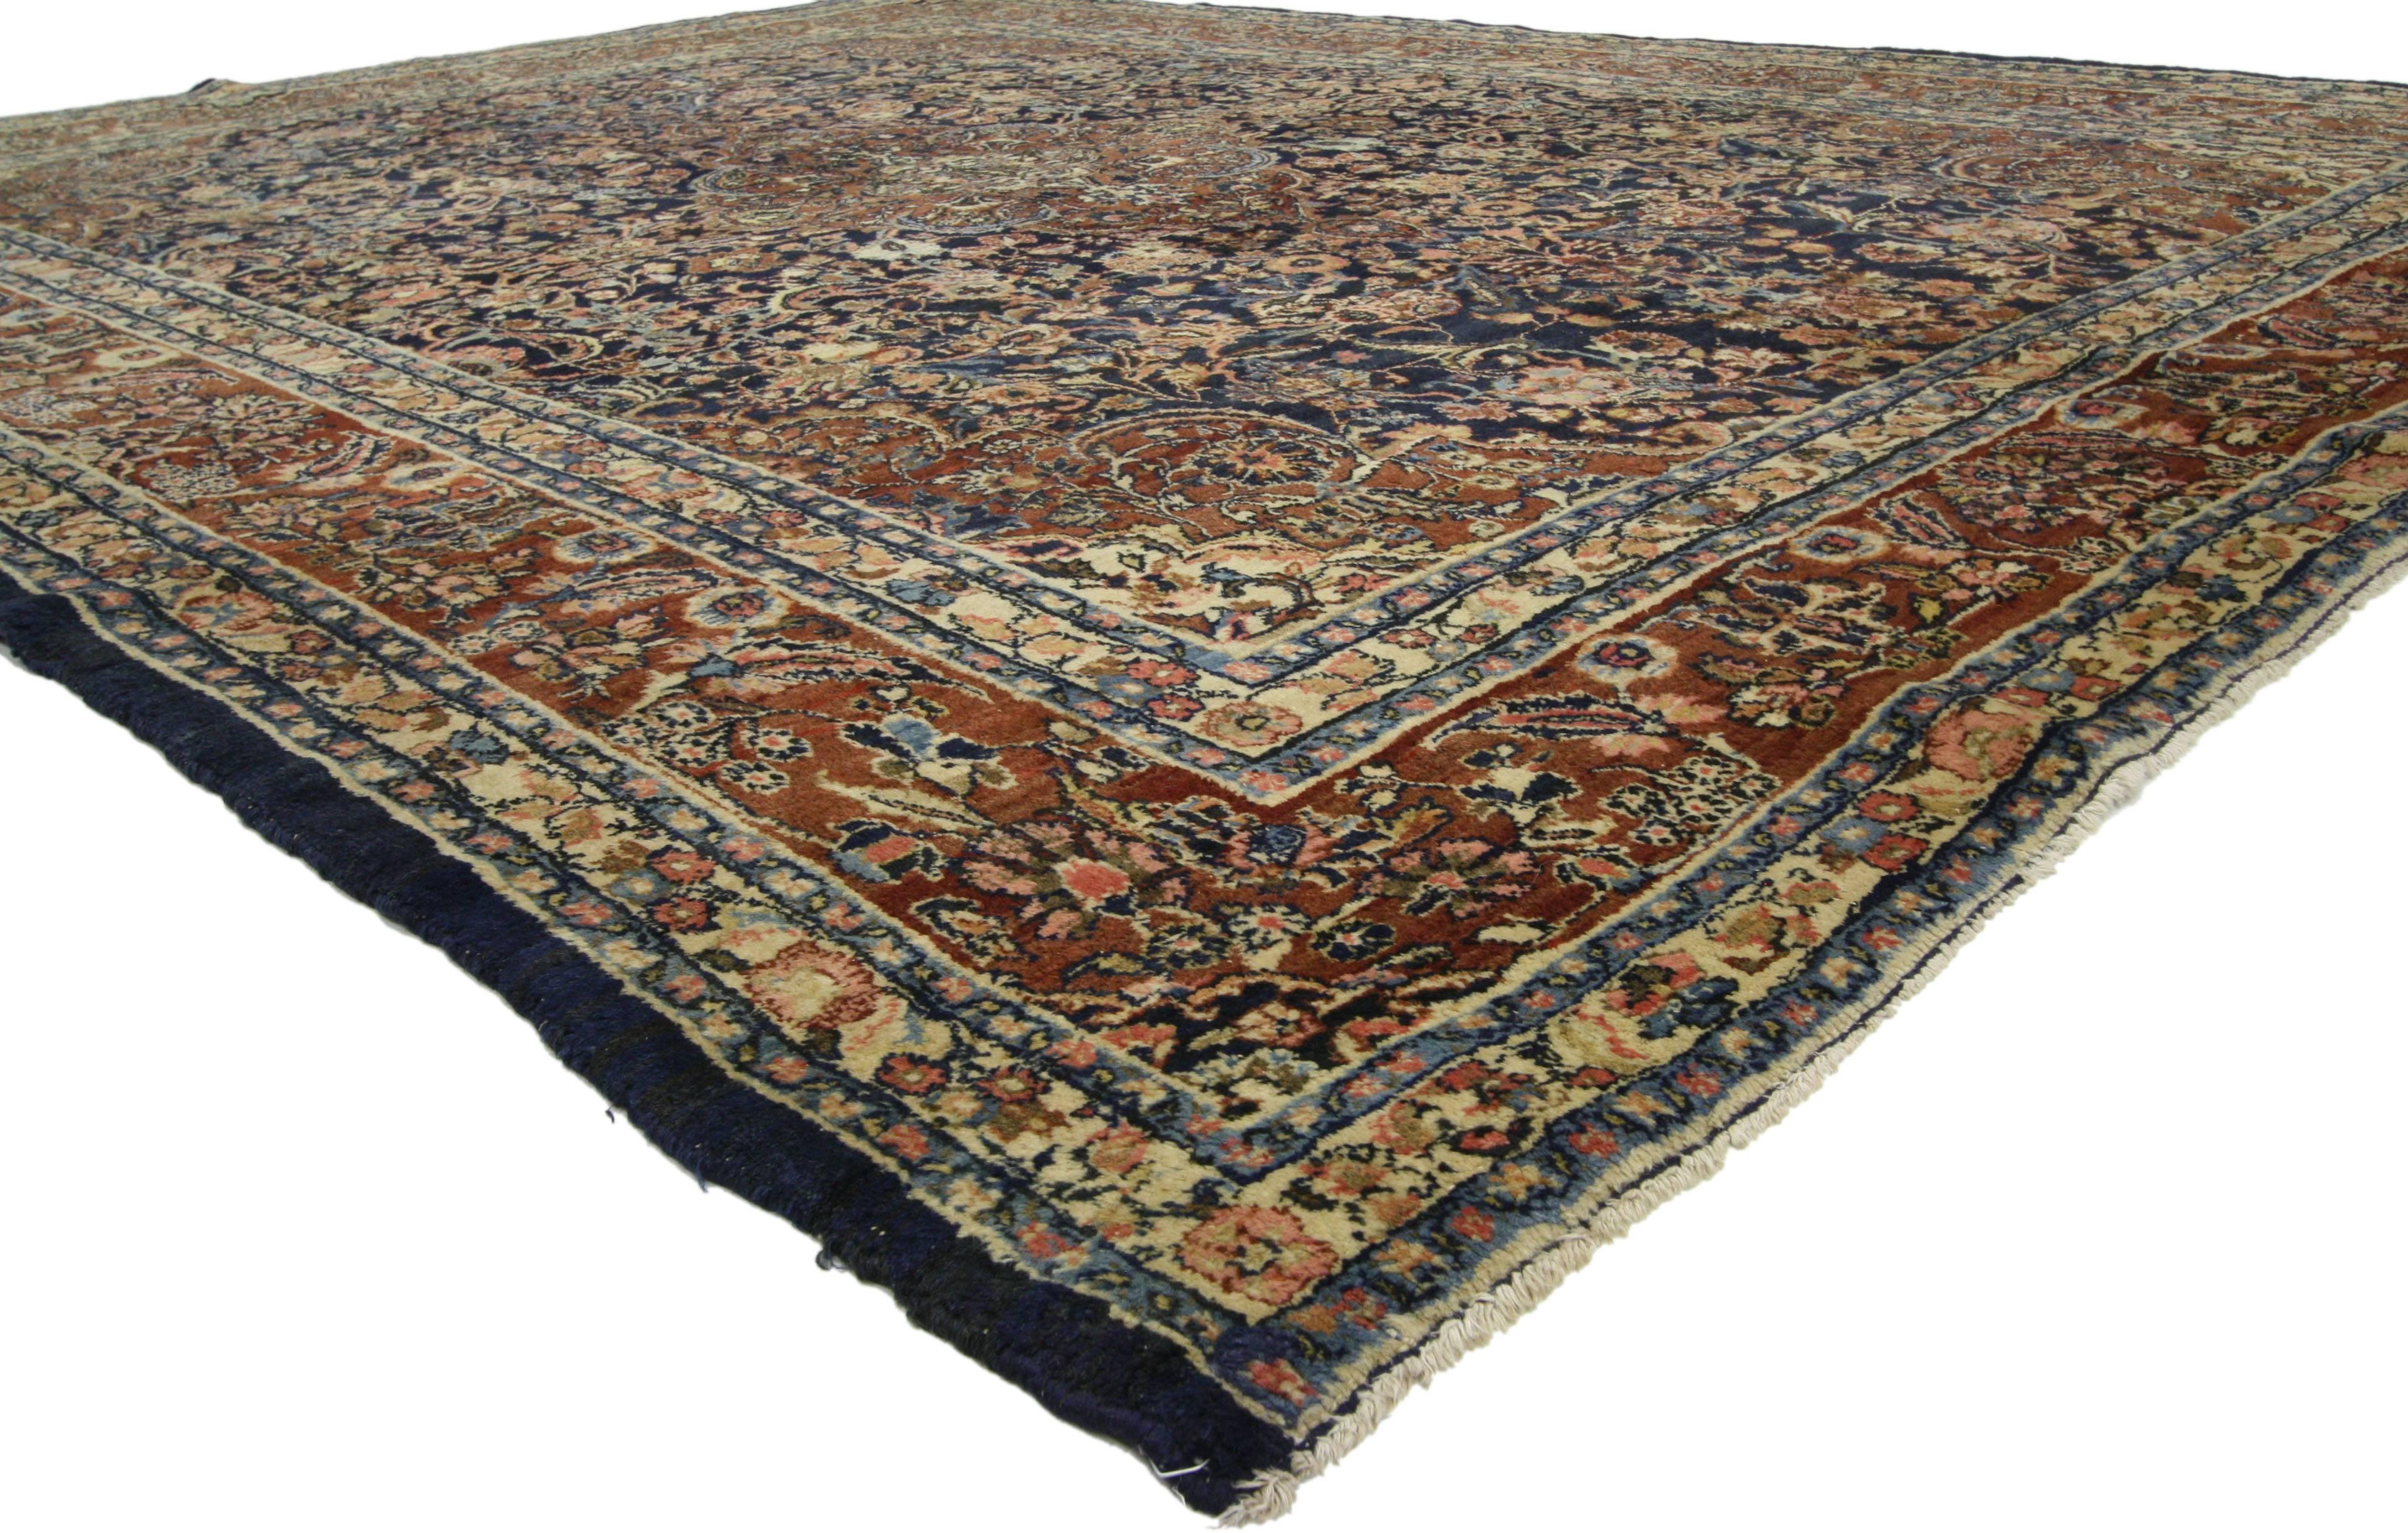 Hand-Knotted Antique Persian Kashan Rug with Traditional Old World Style in Warm Colors For Sale